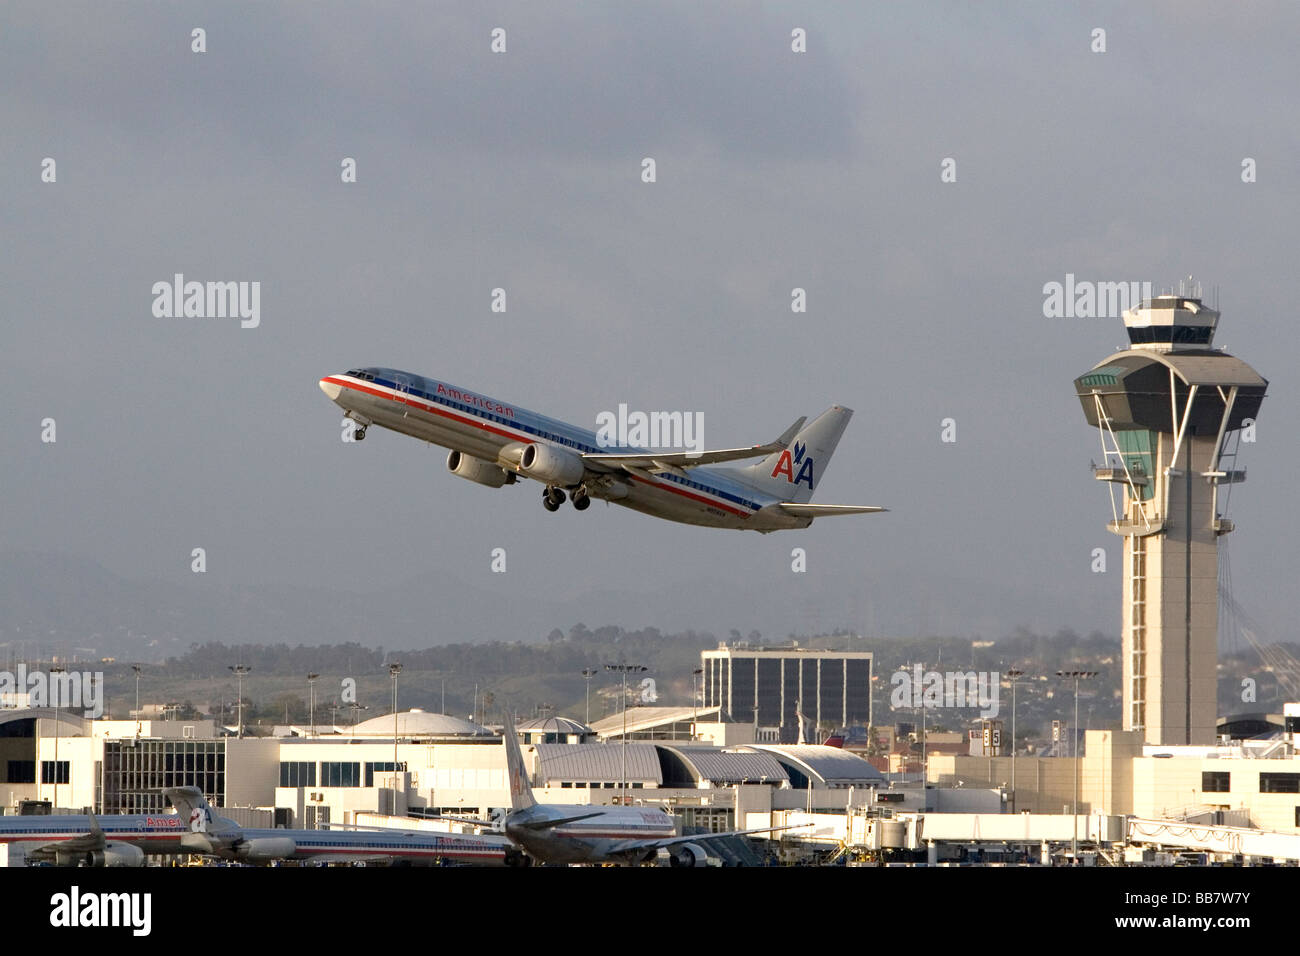 American Airlines Boeing 737 taking off from LAX in Los Angeles California USA Stock Photo